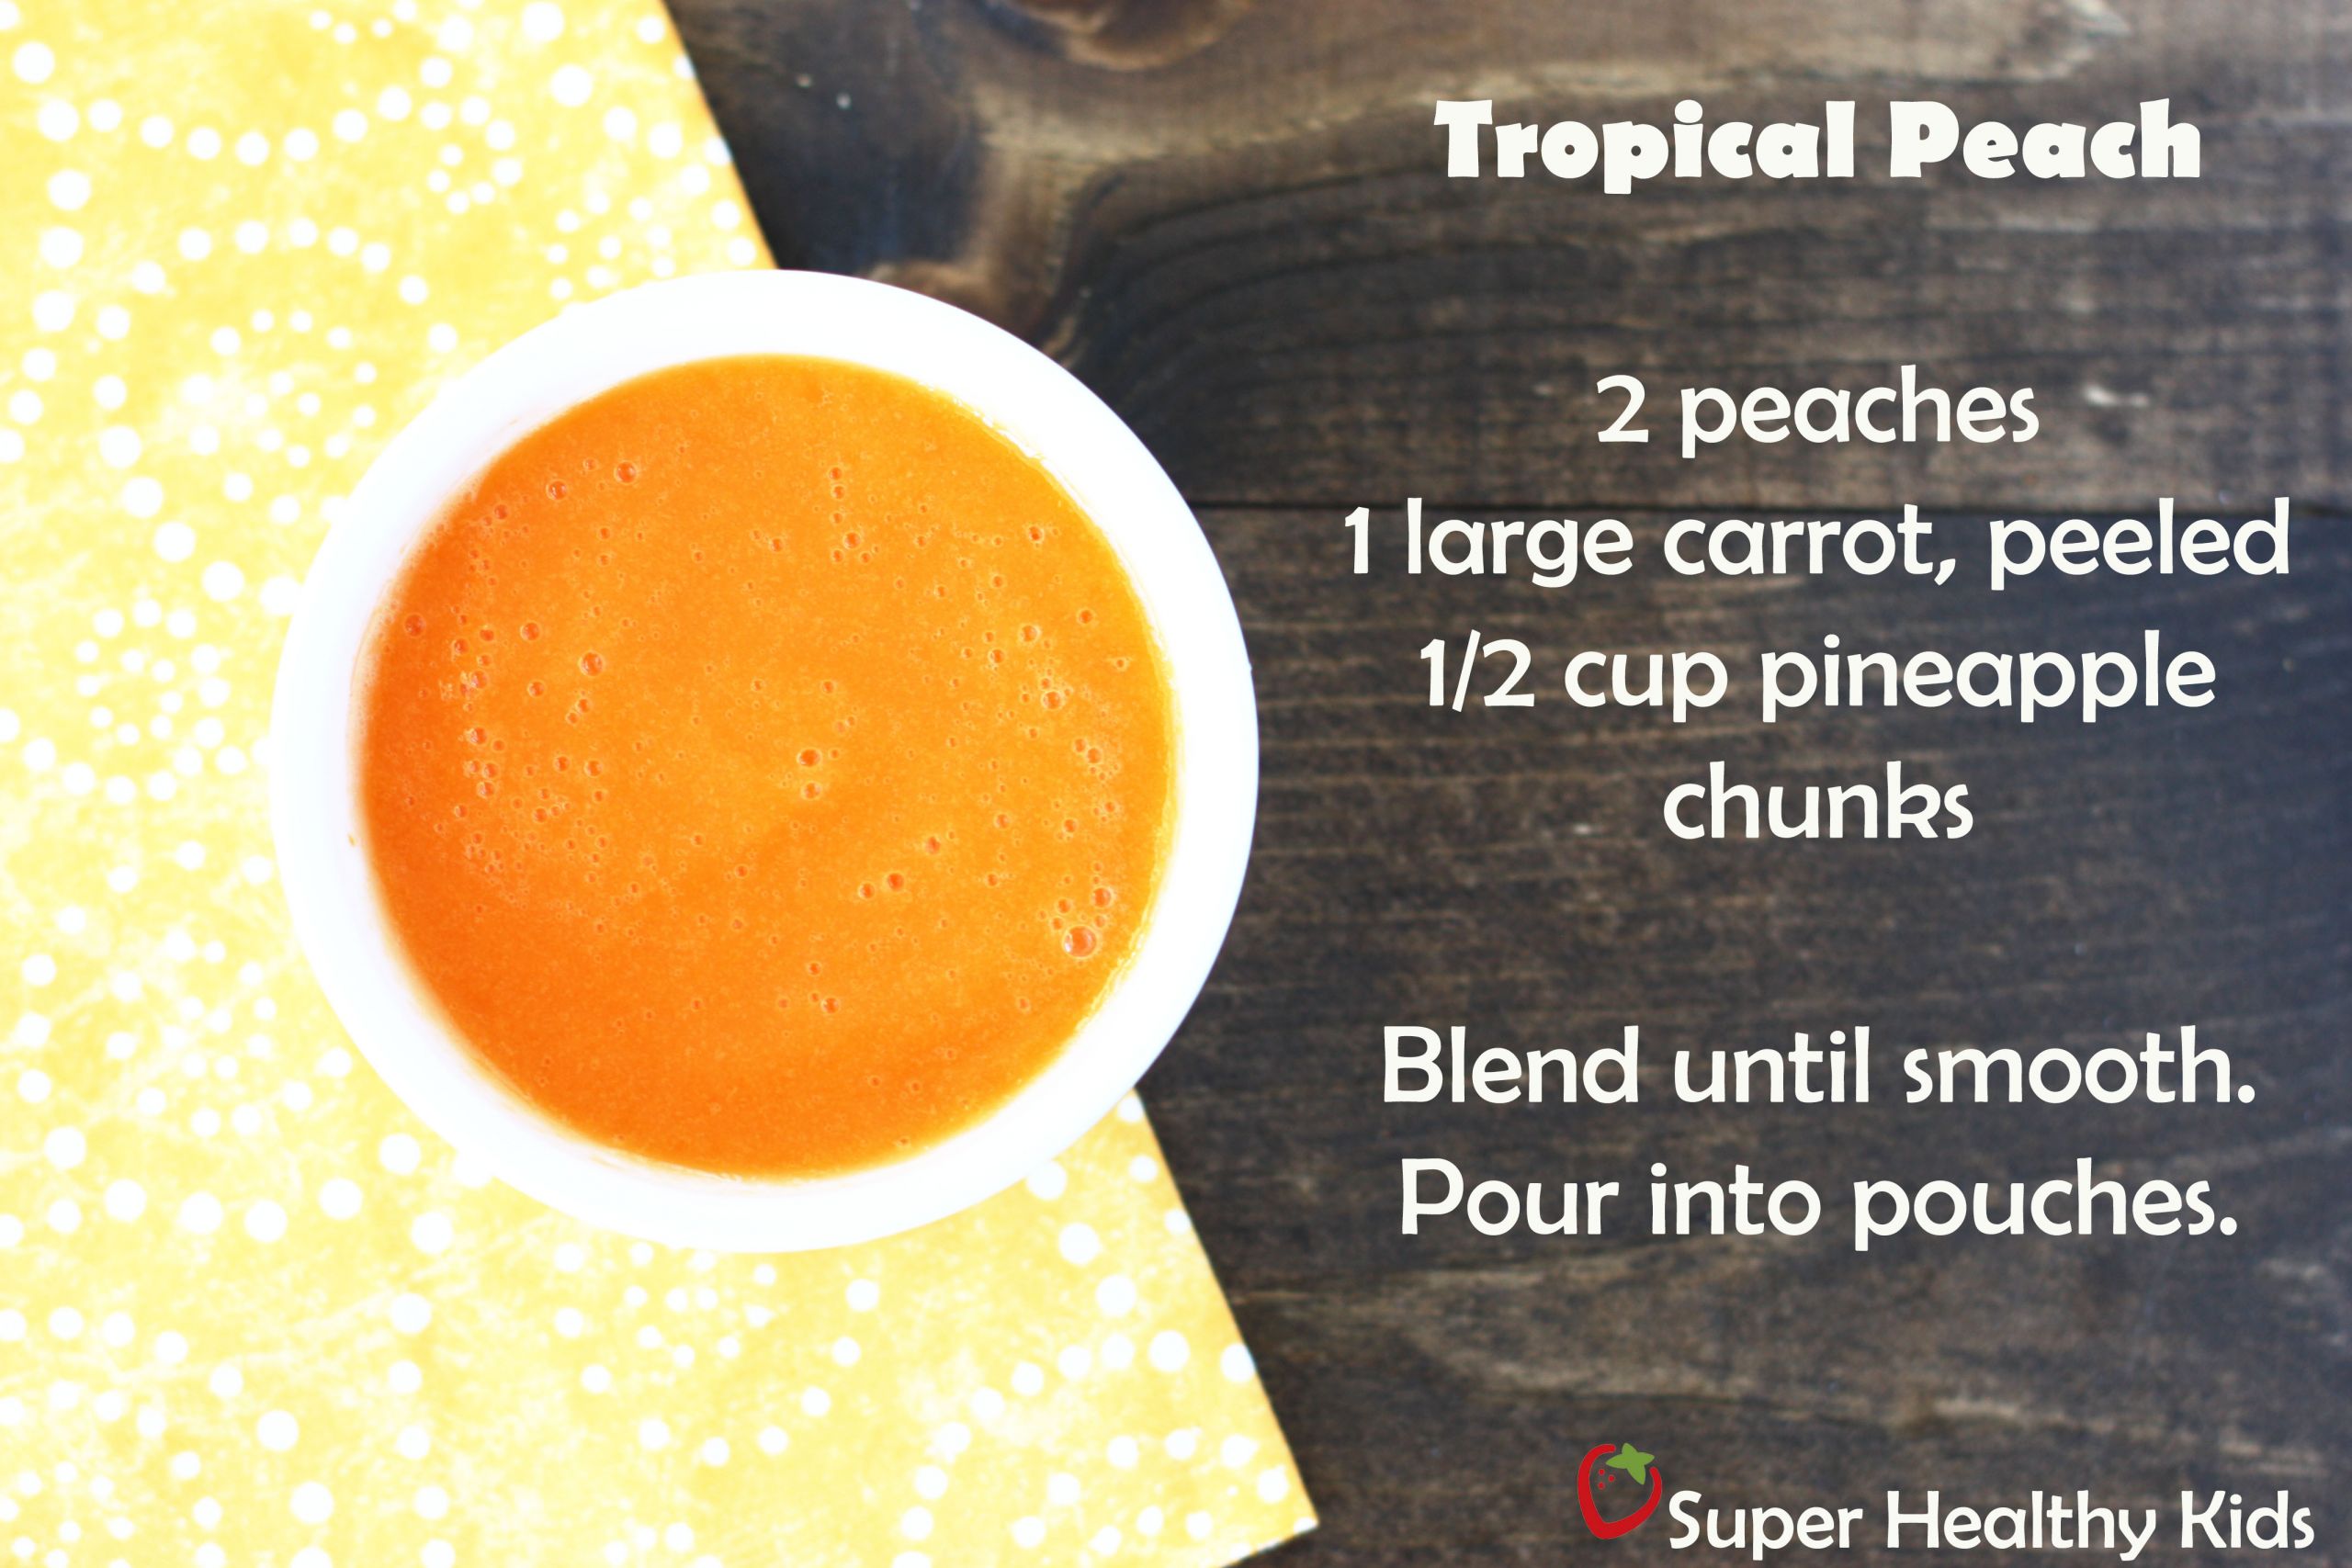 Recipe Baby Food
 5 Super Healthy Baby Food Recipes for Squeeze Pouches